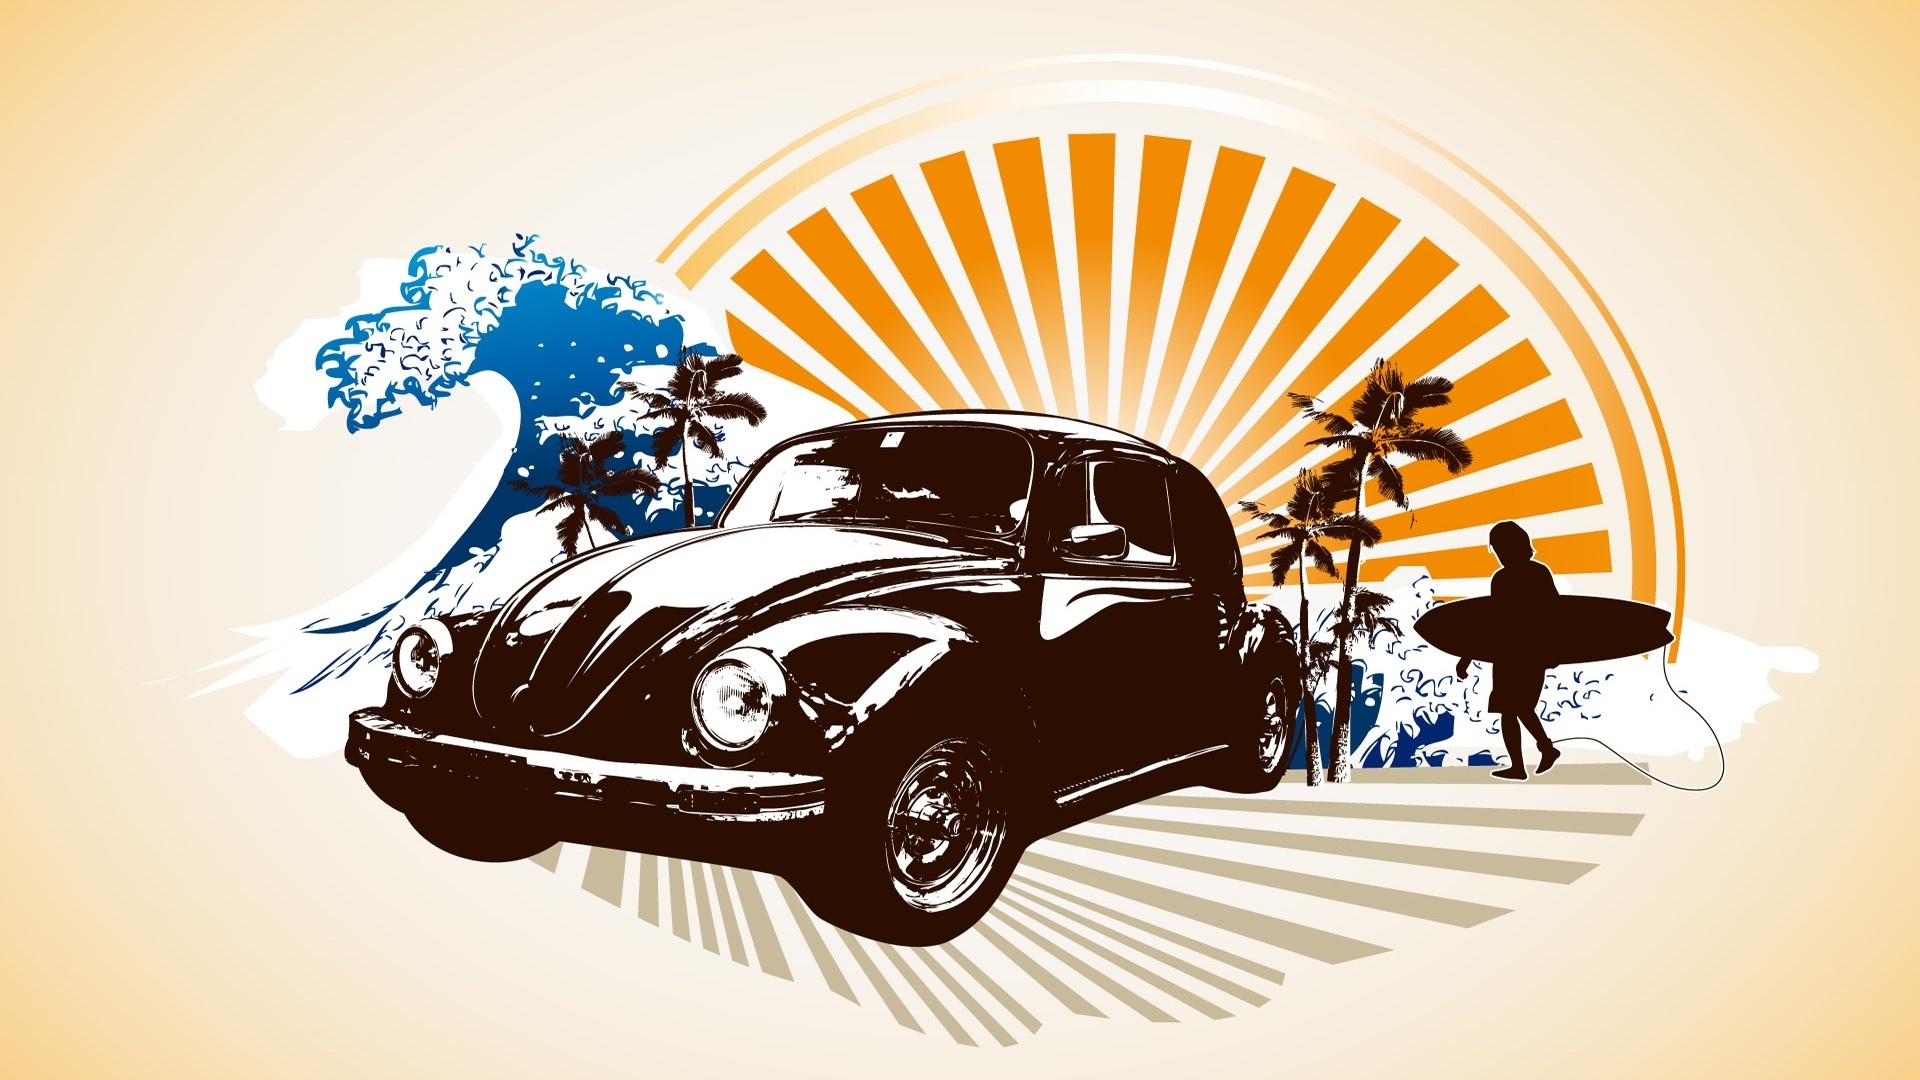 VW Beetle Vector for 1920 x 1080 HDTV 1080p resolution